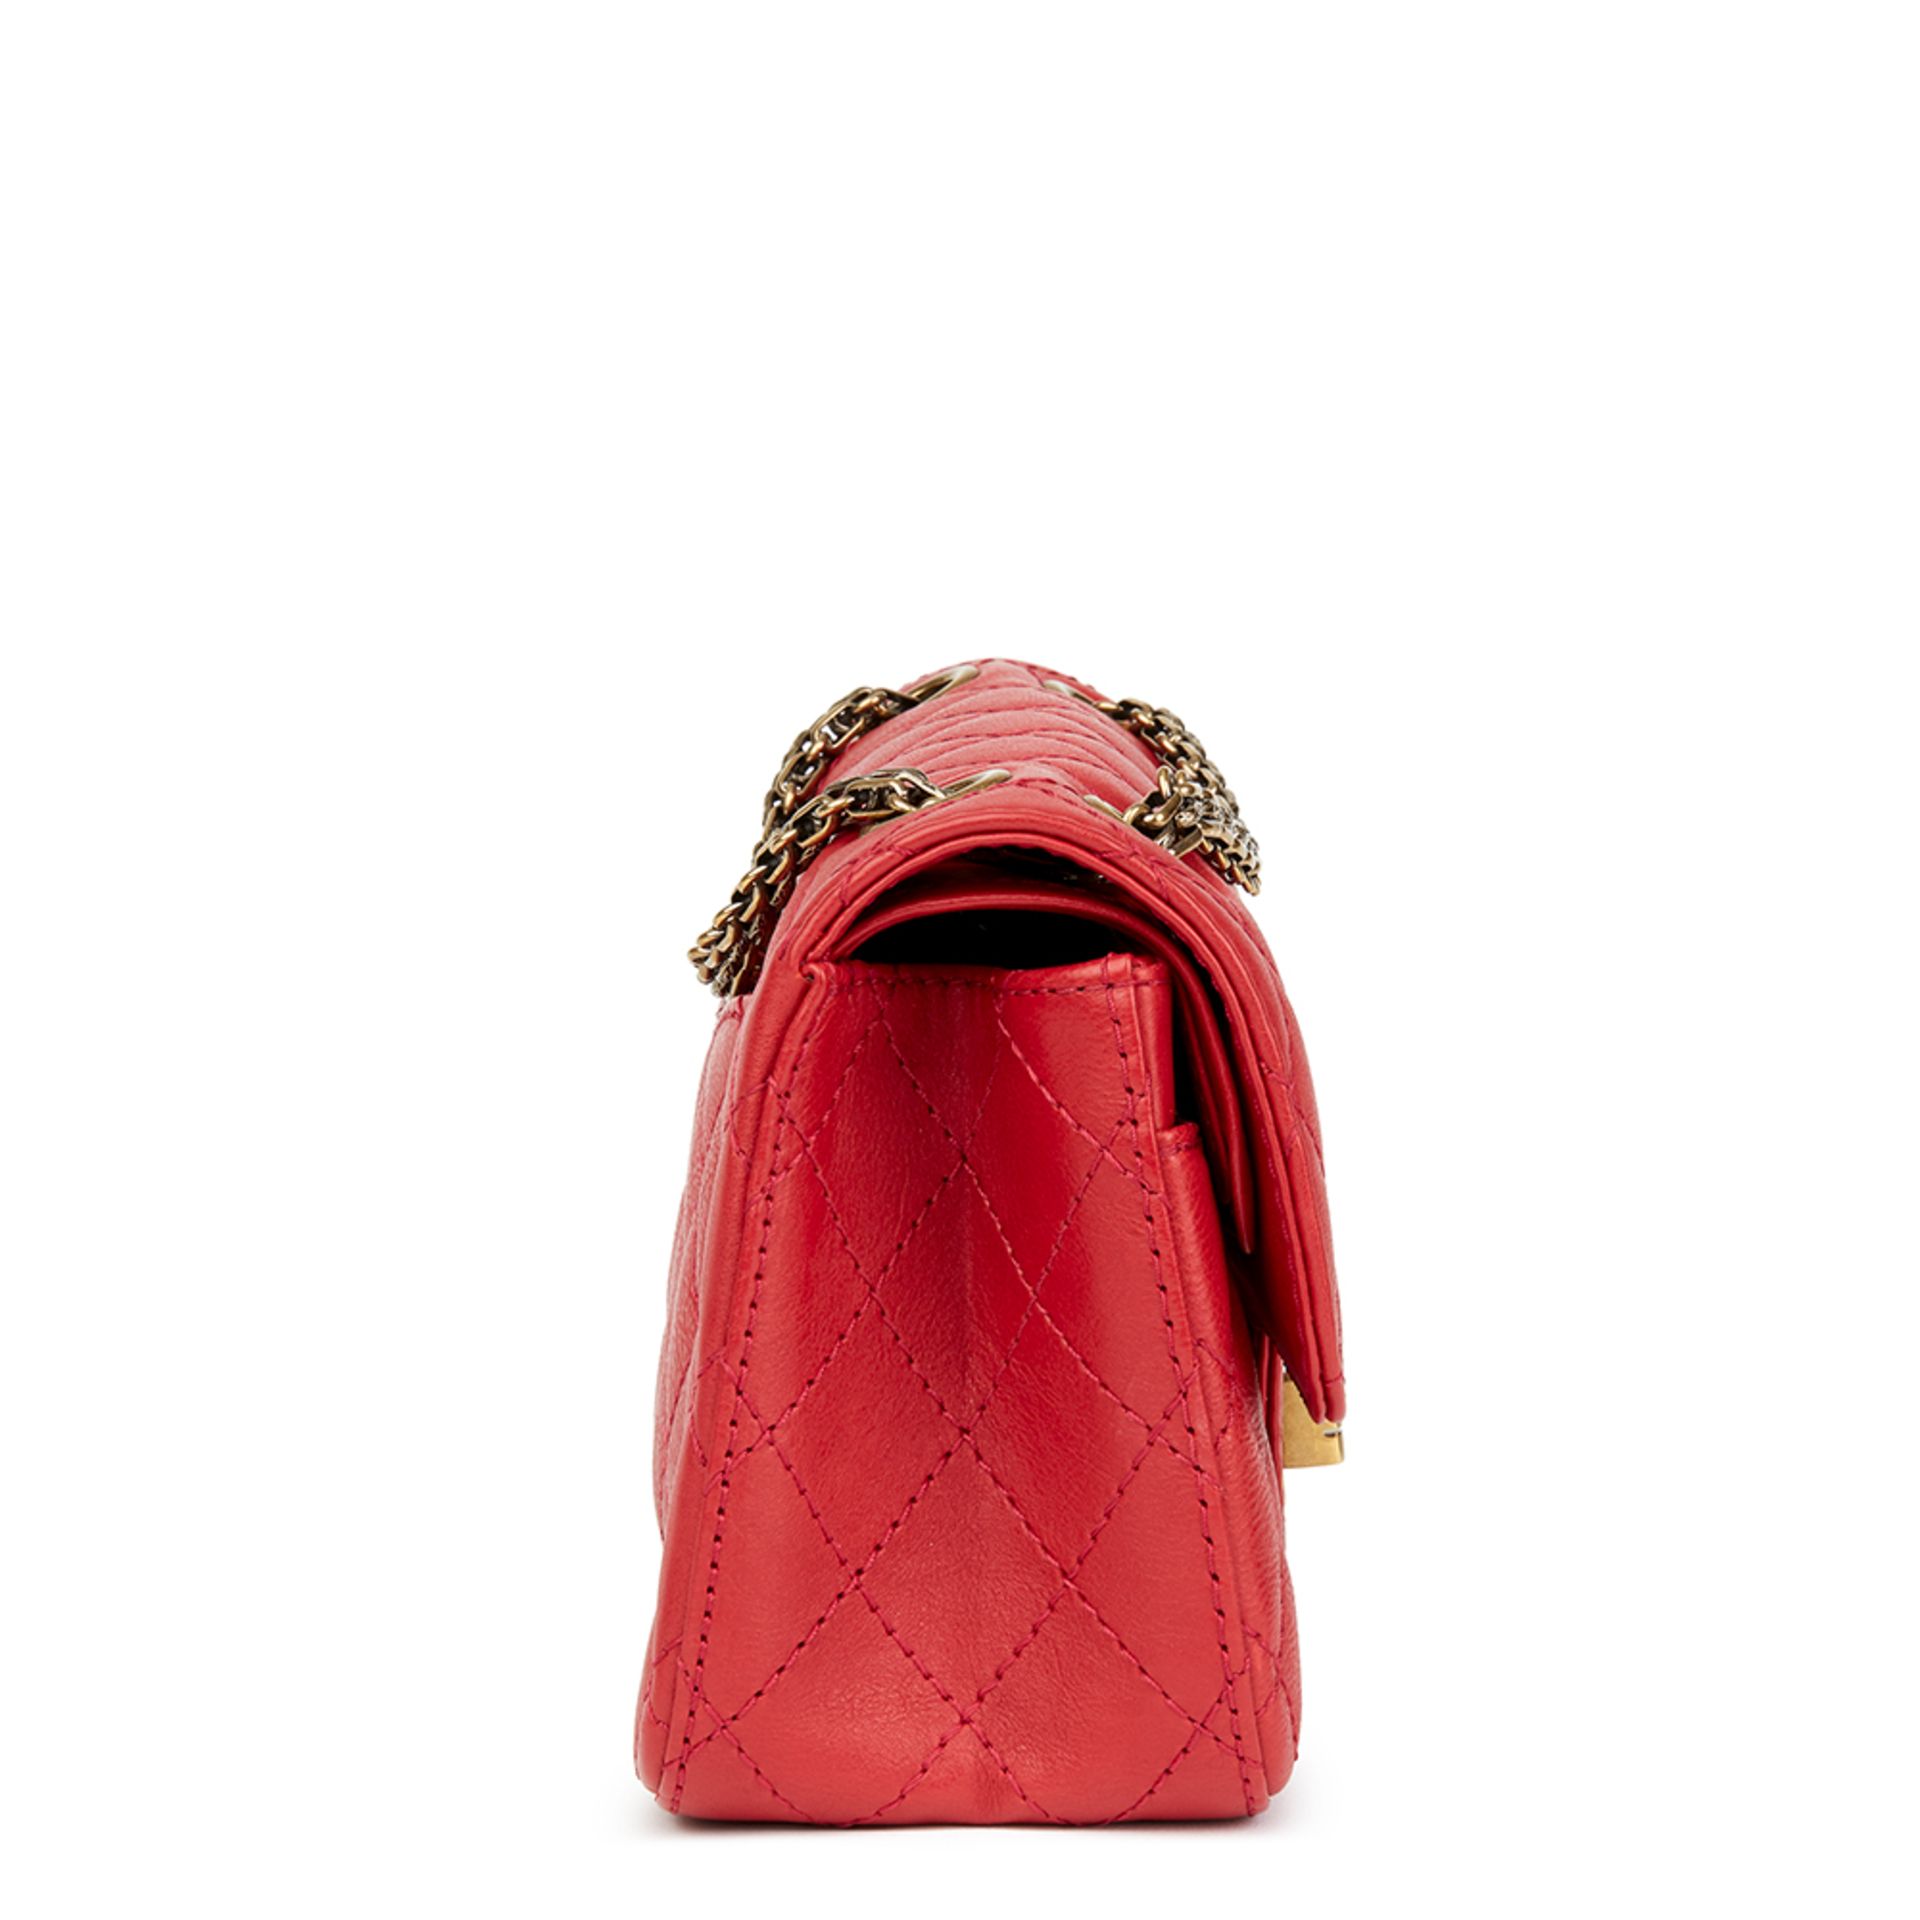 Chanel Red Quilted Calfskin Leather 2.55 Reissue 224 Double Flap Bag - Image 3 of 10